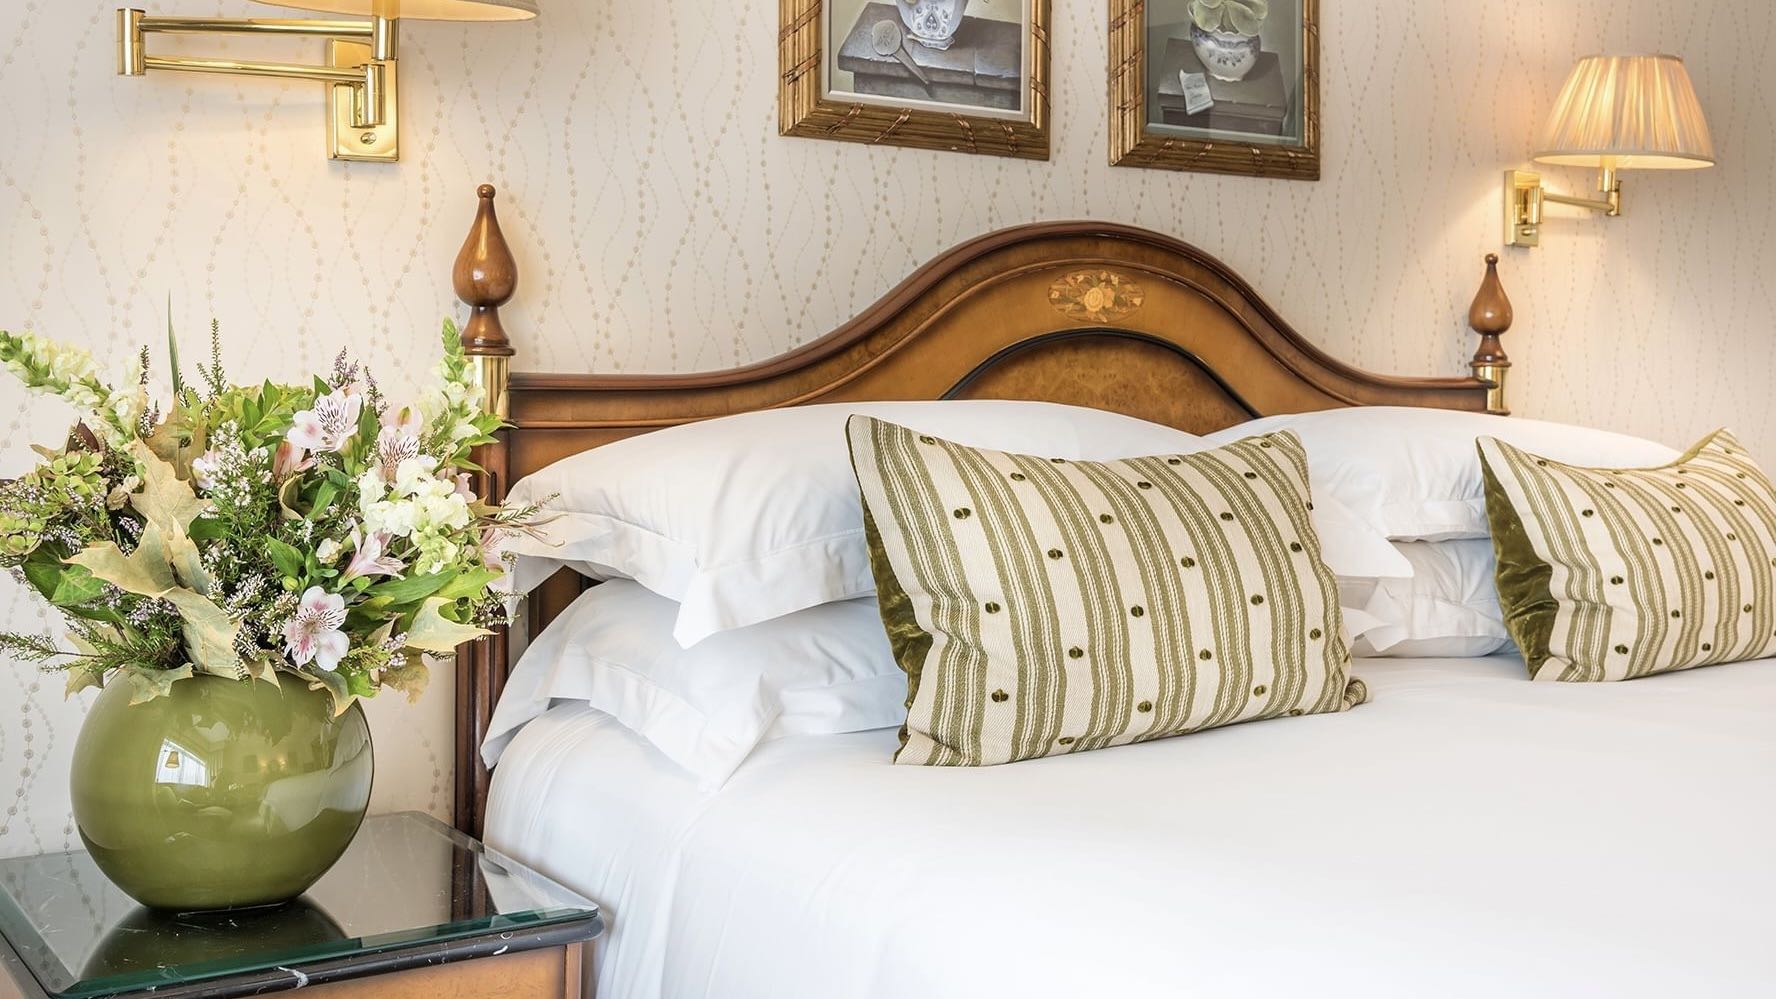 The Capital Hotel, Apartments & Townhouse – London headroom and pillows in one of the best luxury hotels near Harrods